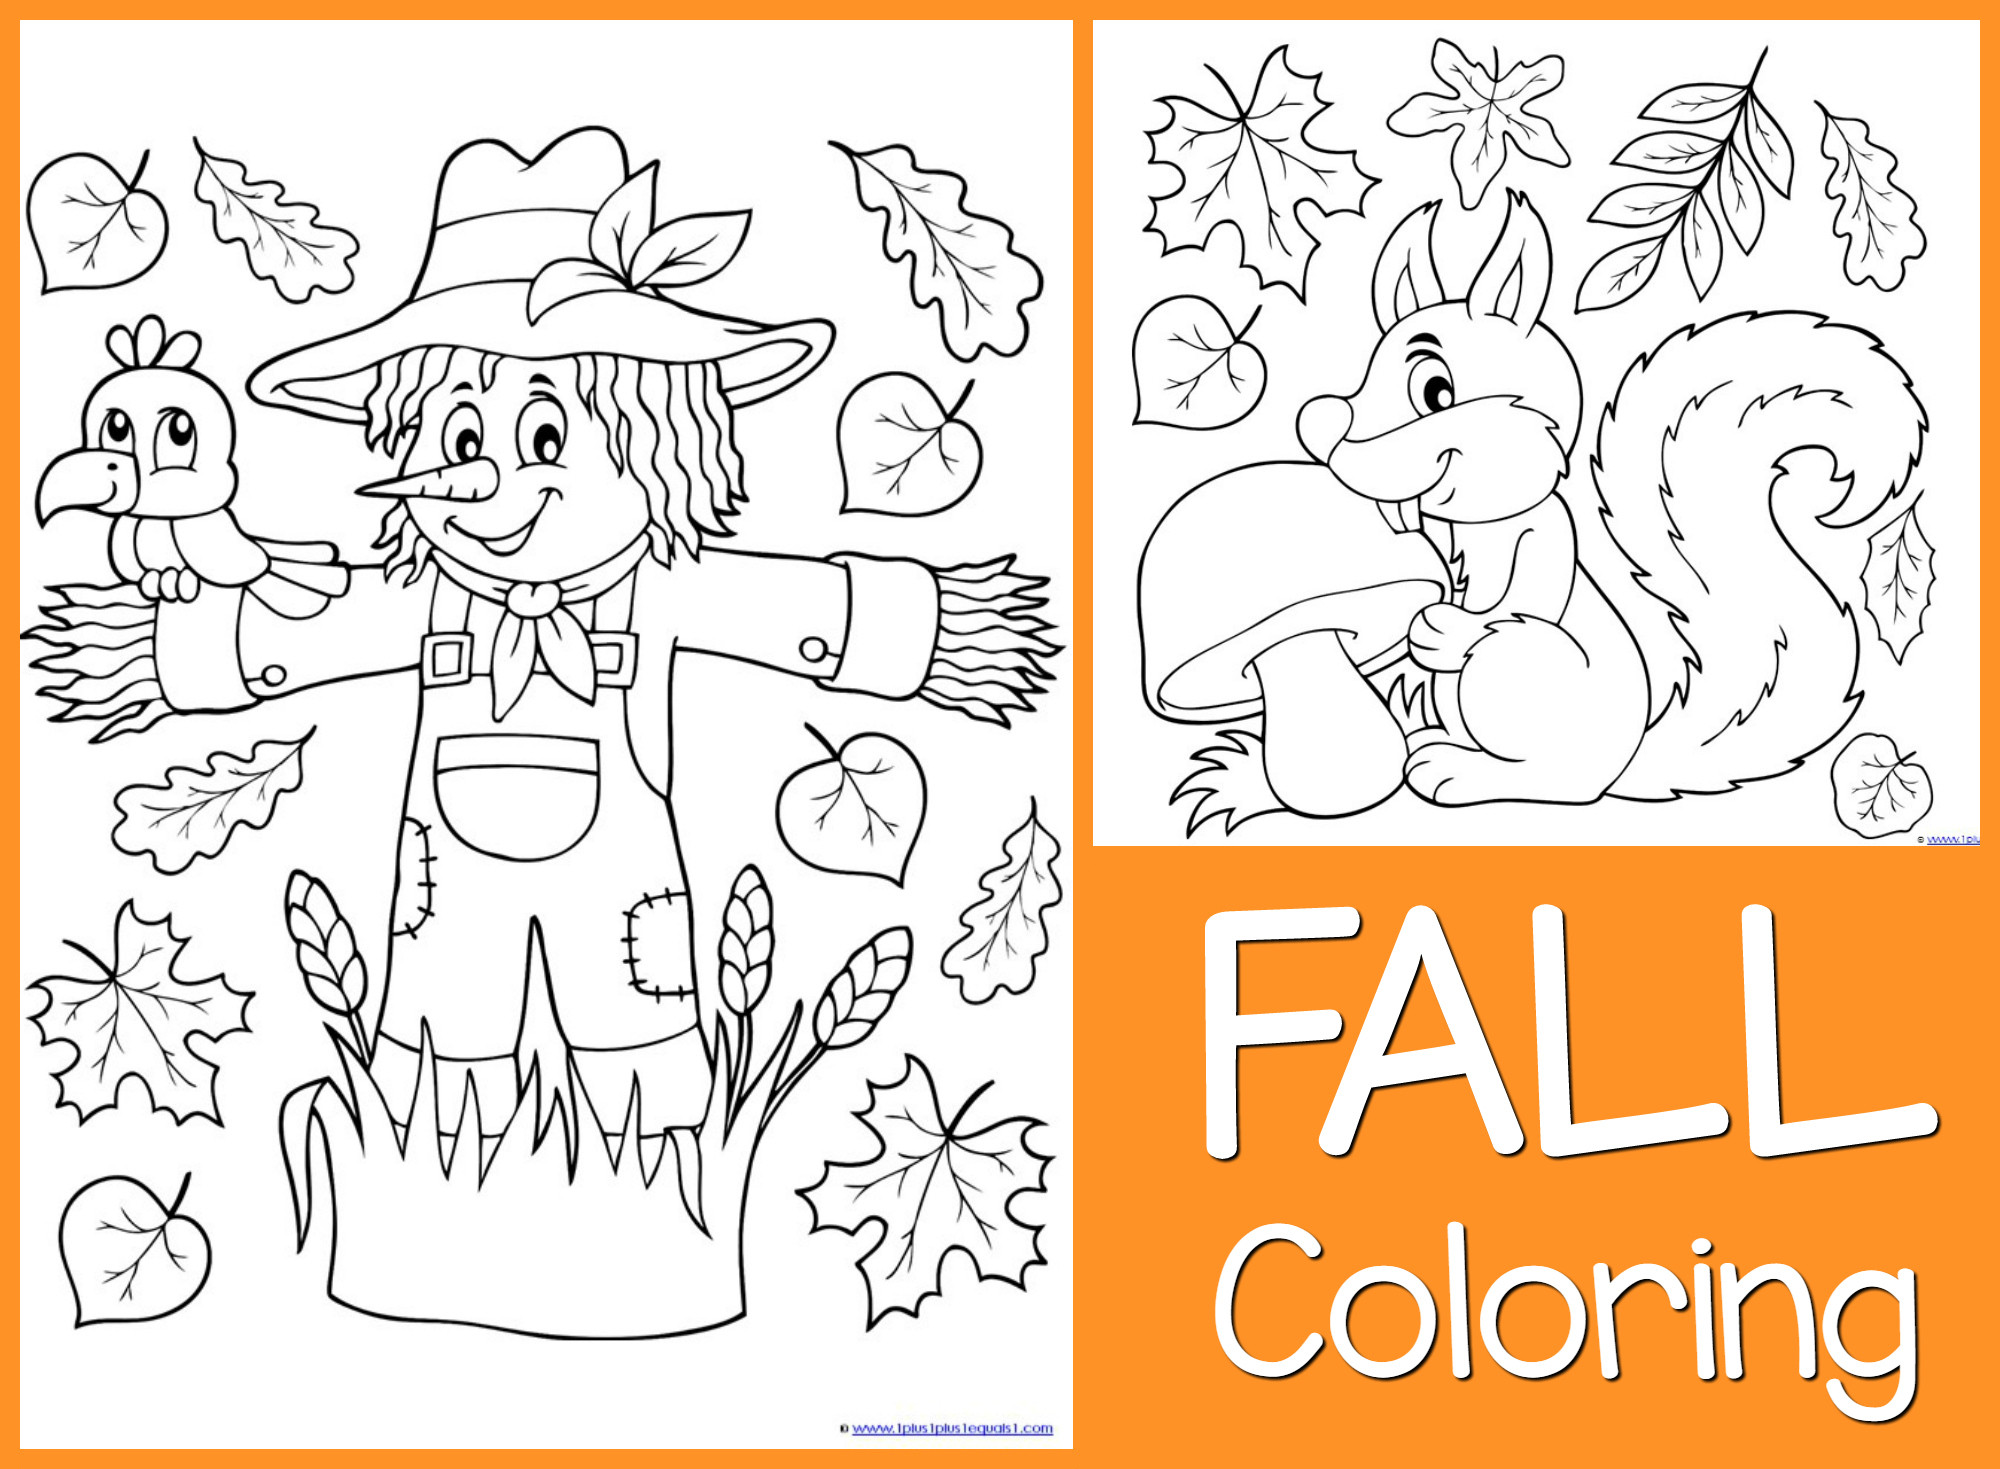 Fun Coloring Pages For Boys Fall
 Just Color Free Coloring Printables